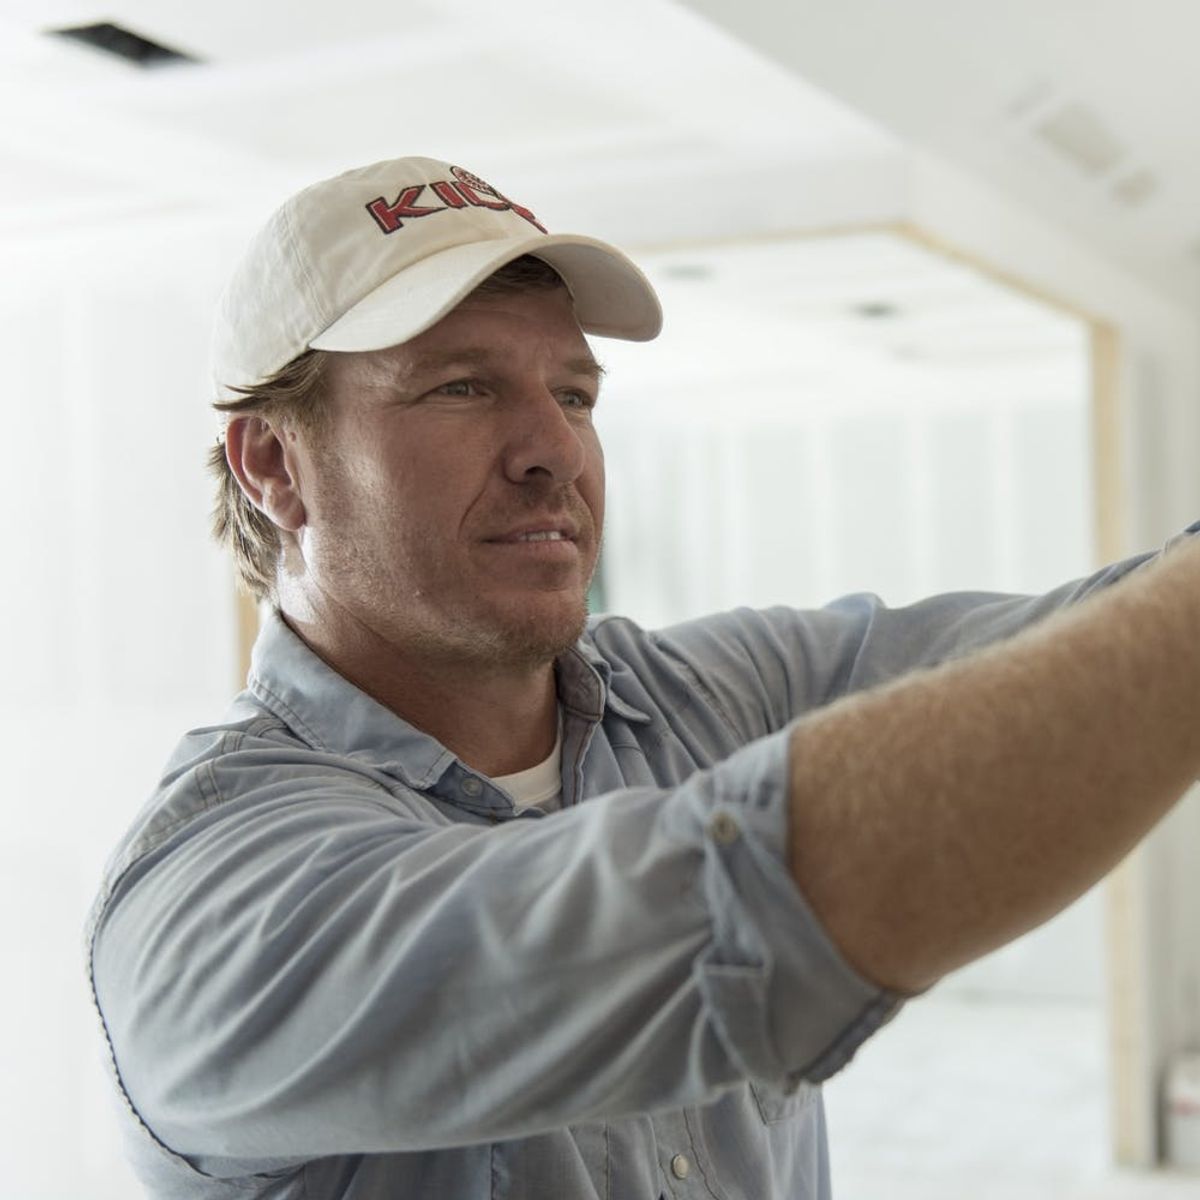 ‘Fixer Upper’ Star Chip Gaines Shares His Best Small-Space Renovation Tips